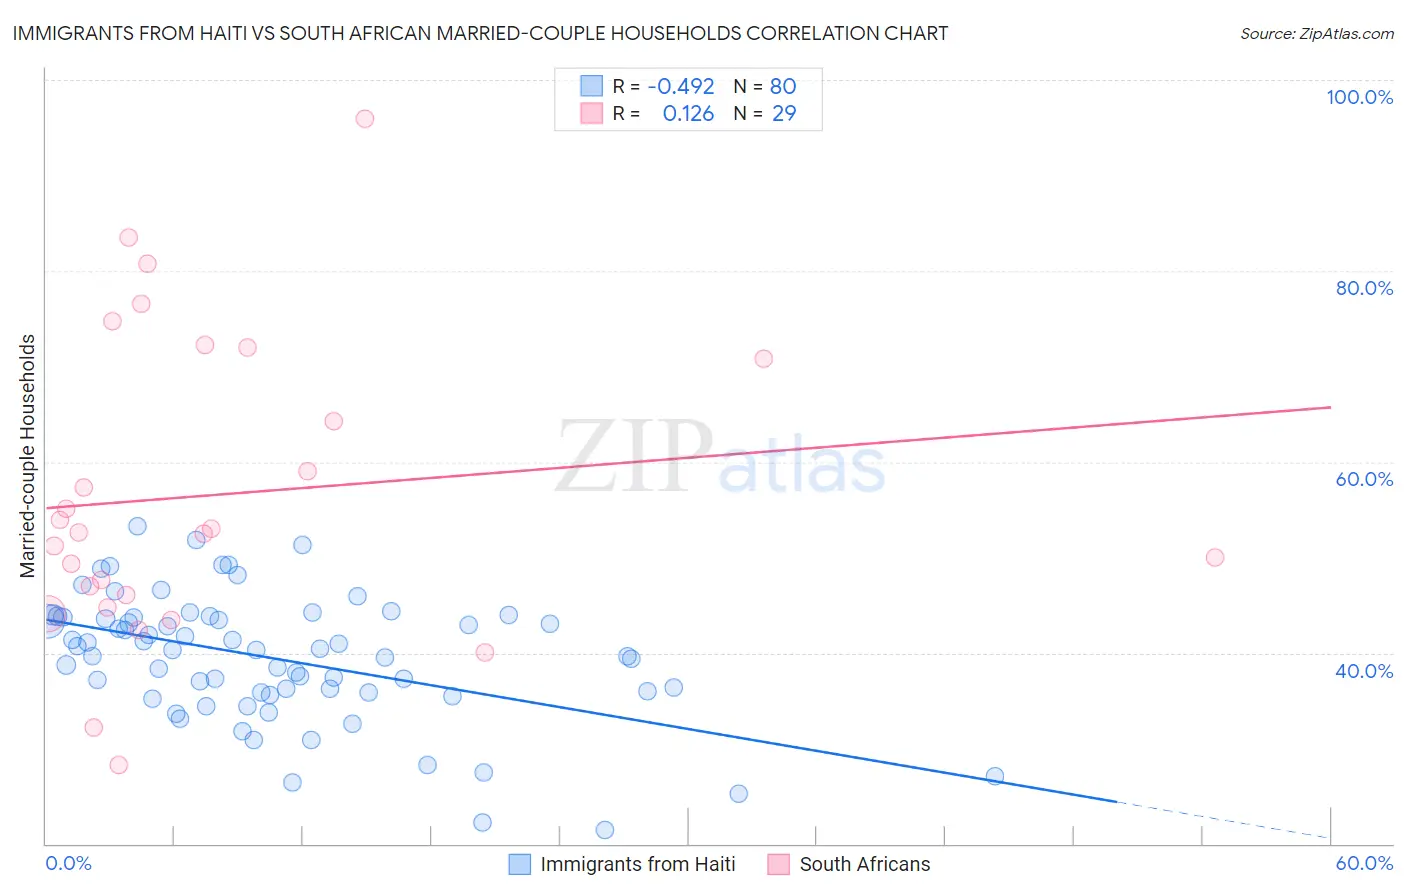 Immigrants from Haiti vs South African Married-couple Households